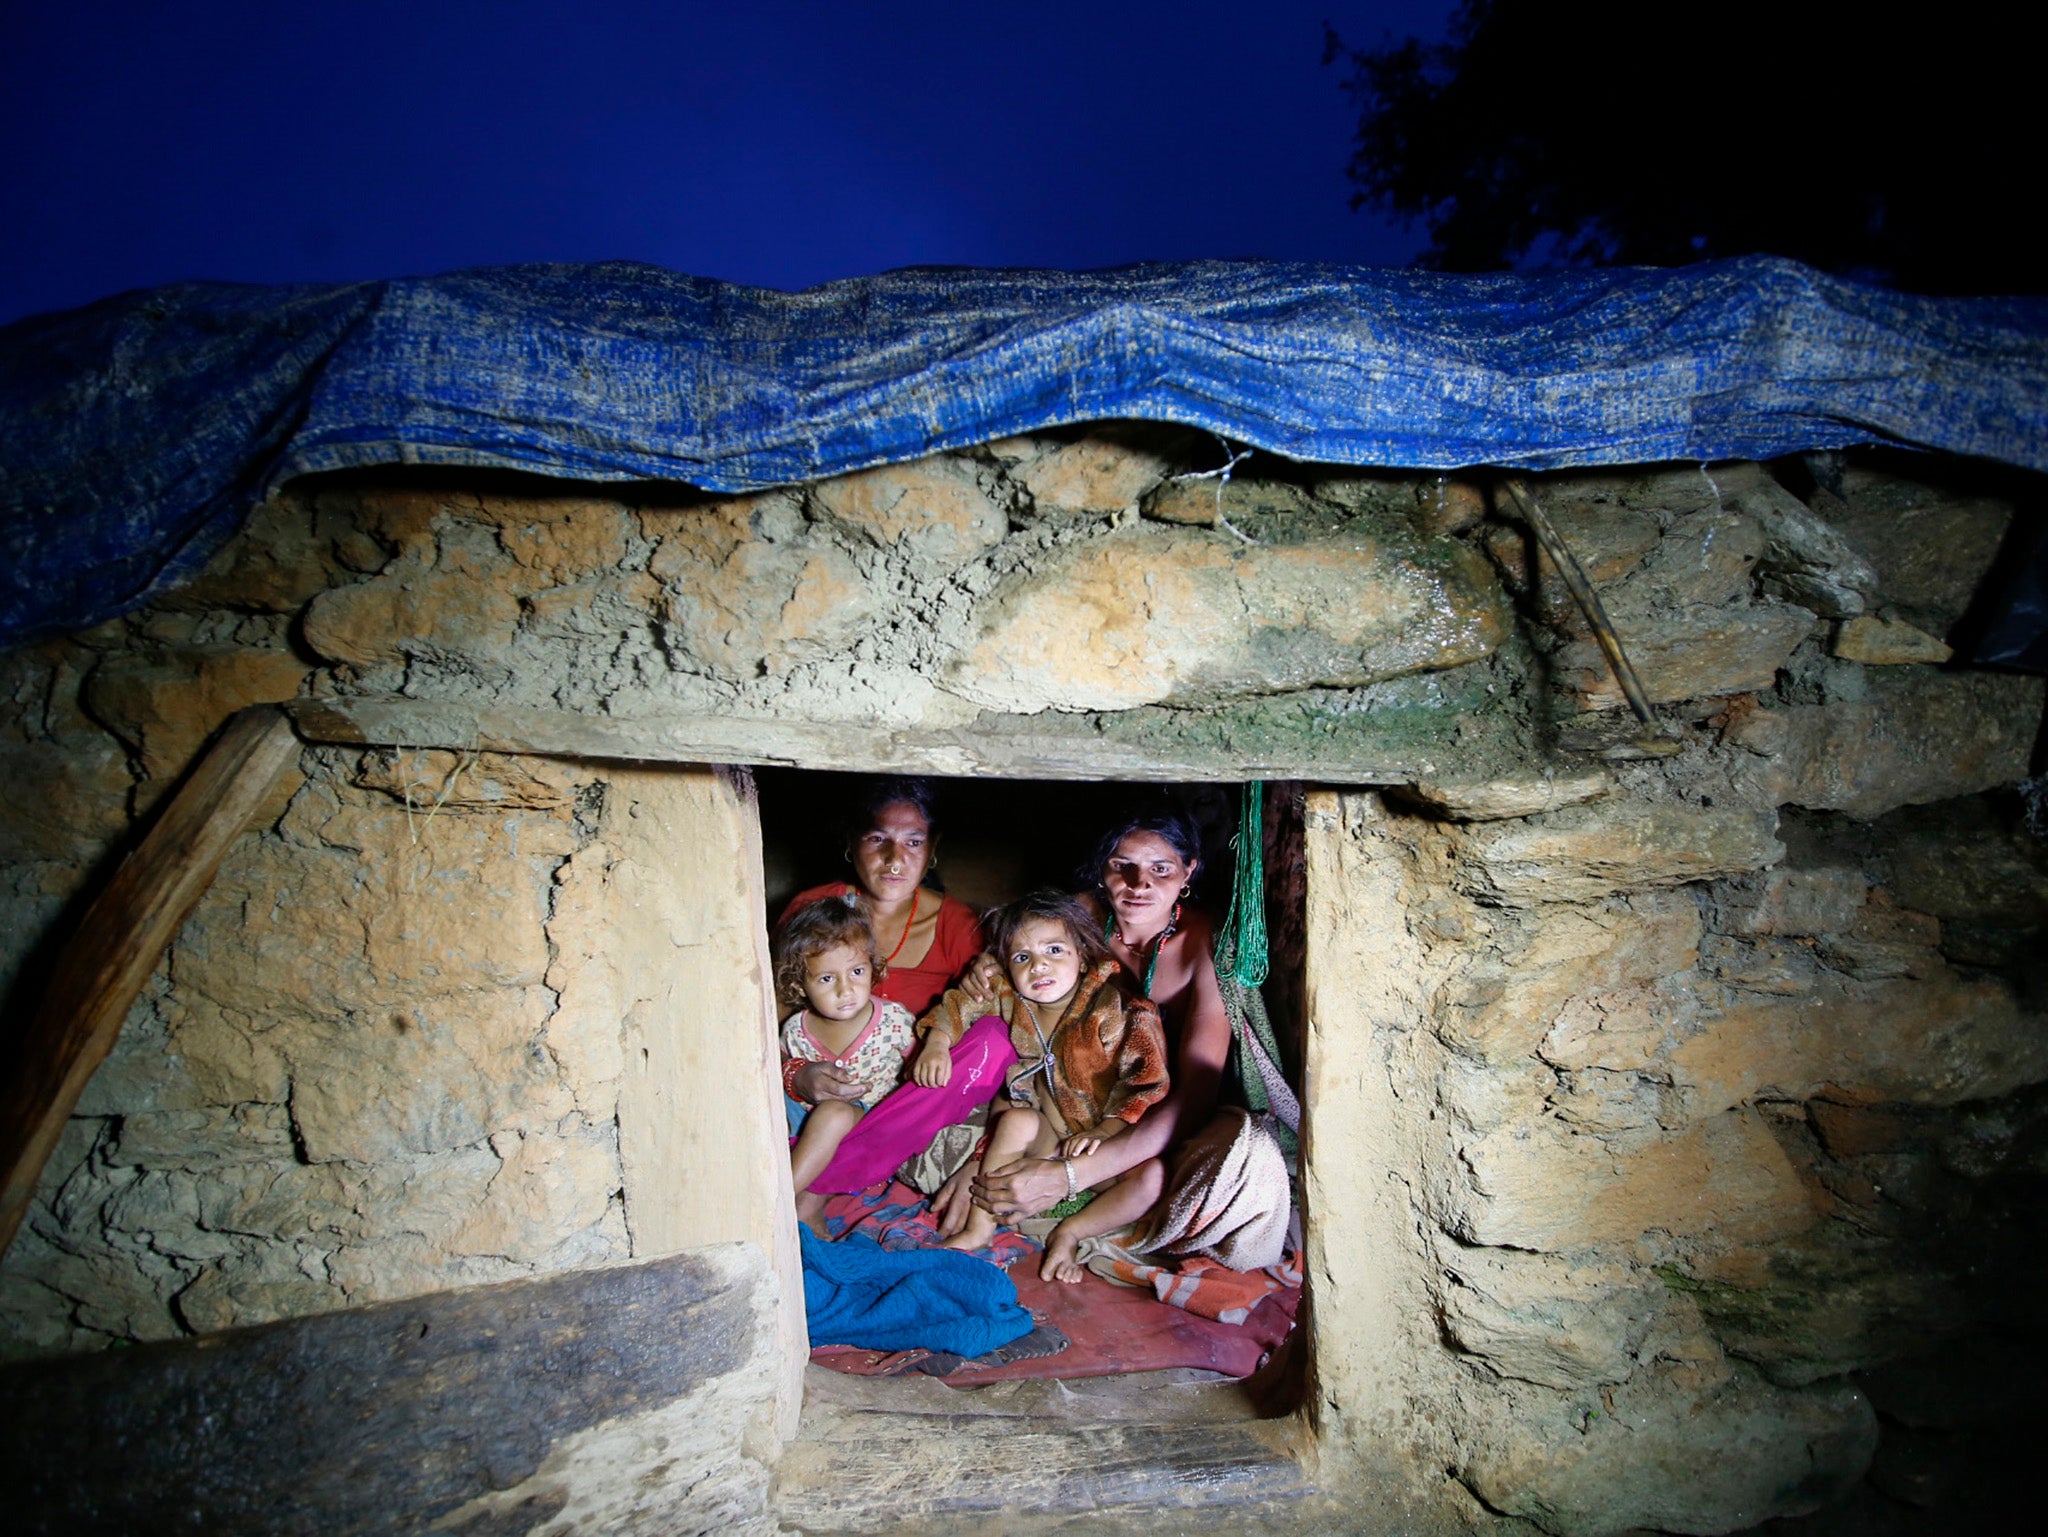 Woman in Nepal who observe the chhaupadi taboo are banished to mud or stone huts, some of them no bigger than closets